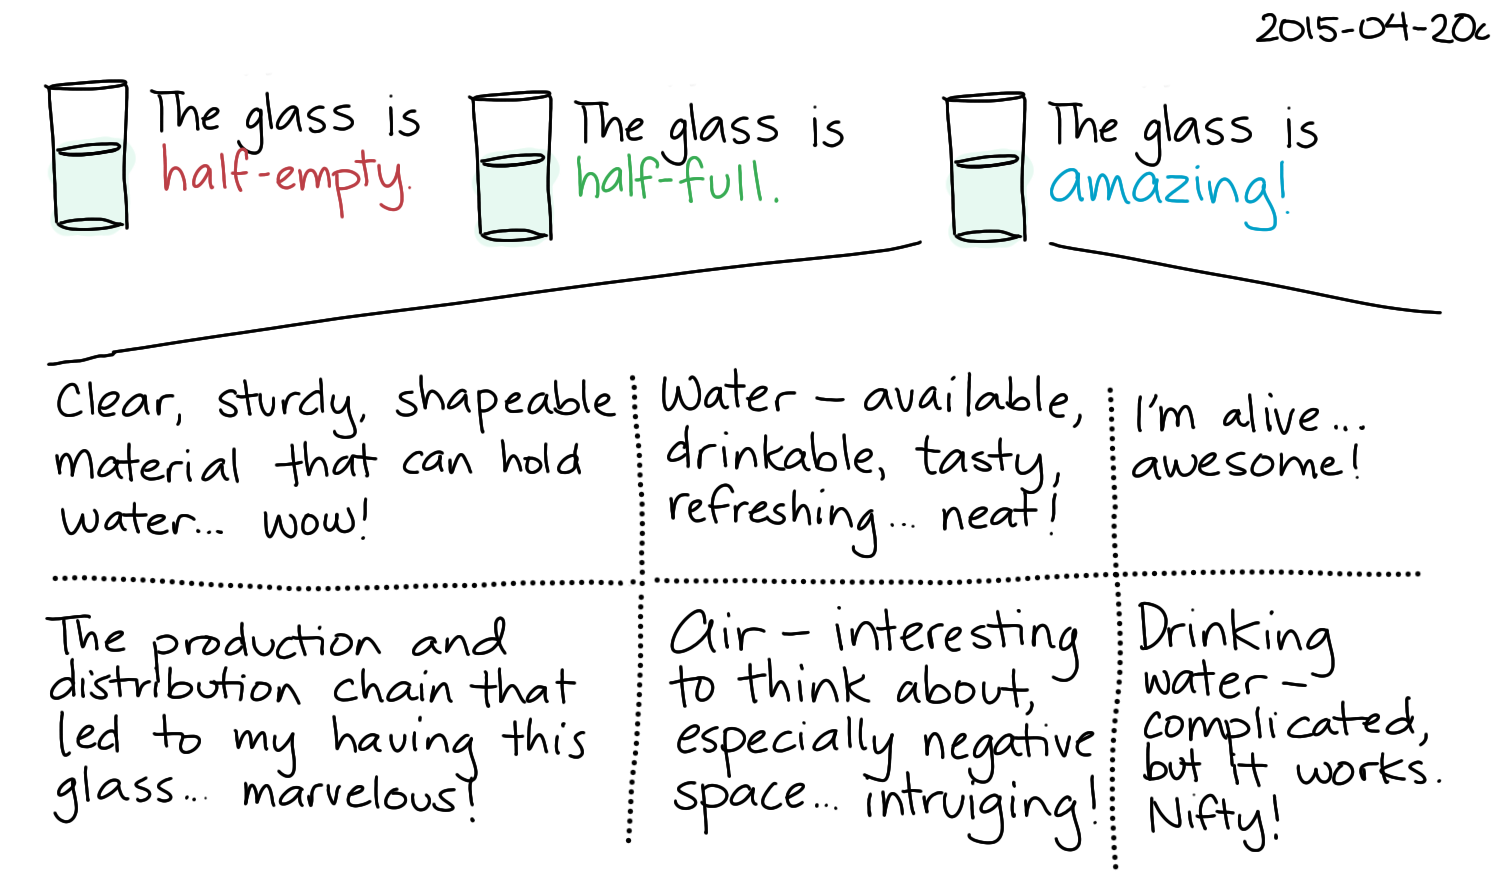 2015-04-20c The glass is amazing -- index card #philosophy #perspective.png